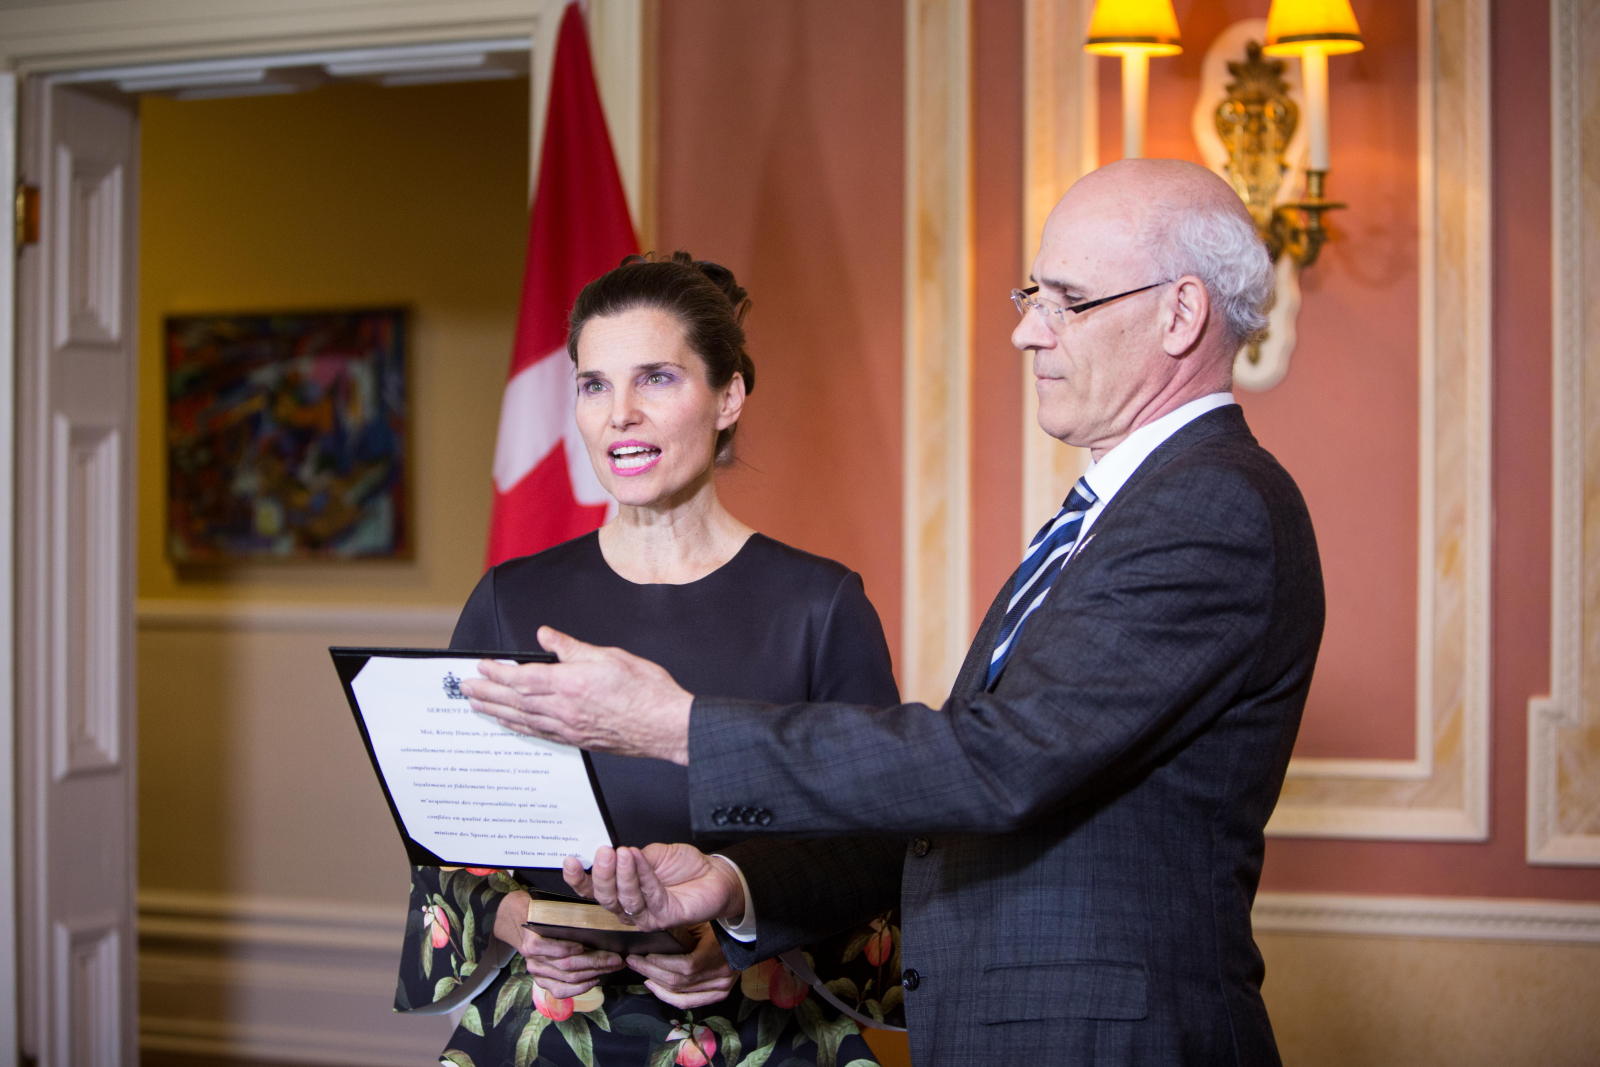 Kirsty Duncan, Science Minister, swearing-in, cabinet shuffle, sport, Michael Wernick